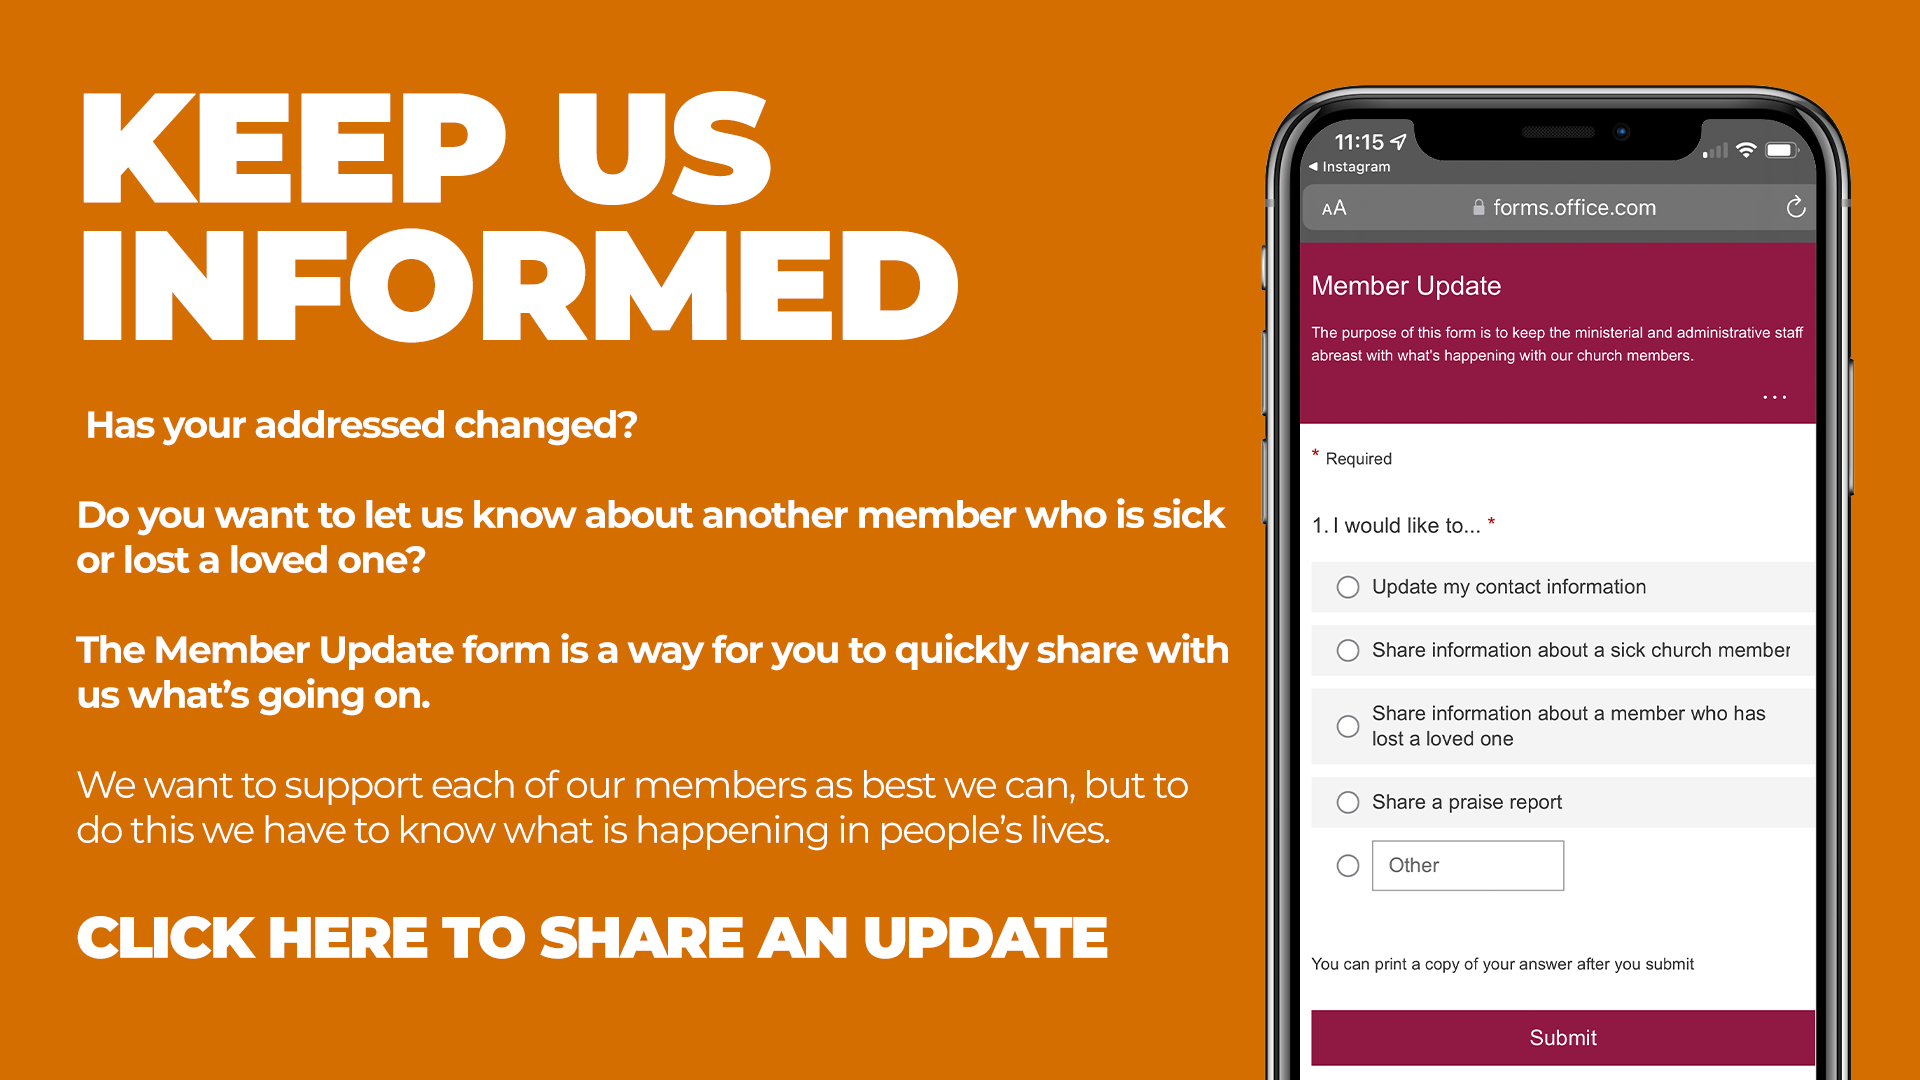 Click here to provide an member update - sickness, death, contact information, or praise report